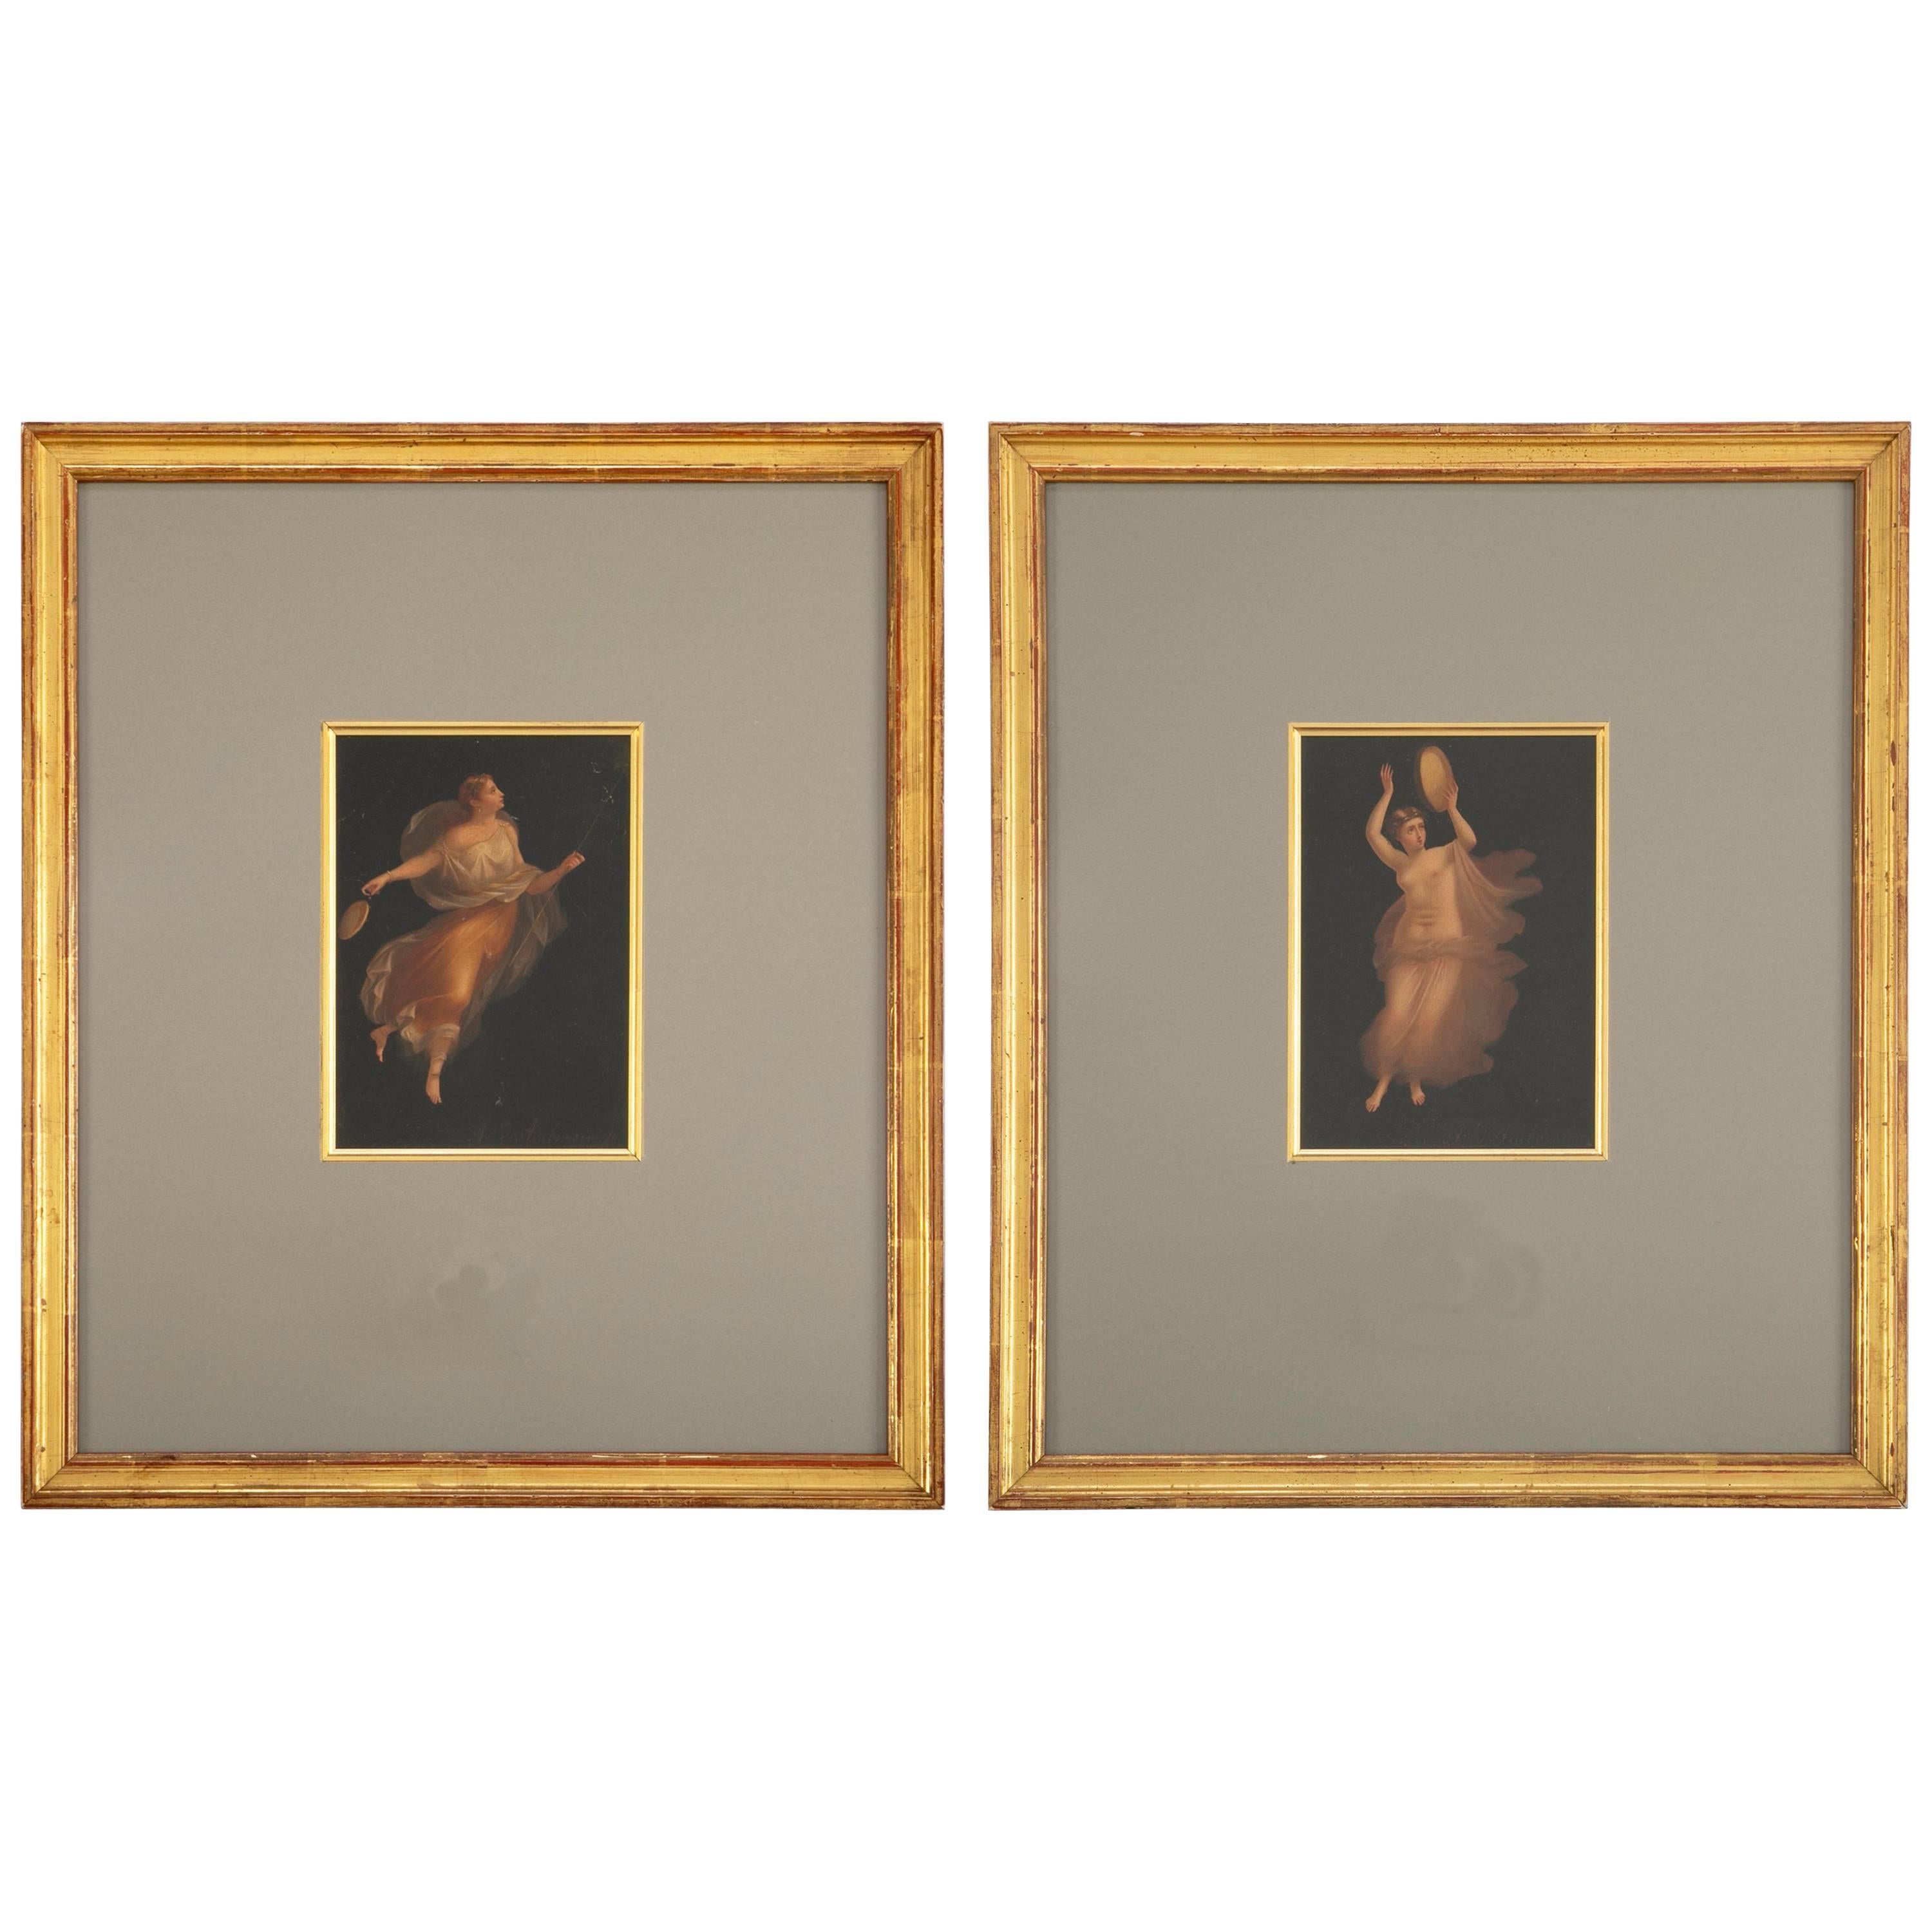 Pair of Italian Grand Tour Paintings of Maenads, After Pompeii, Signed